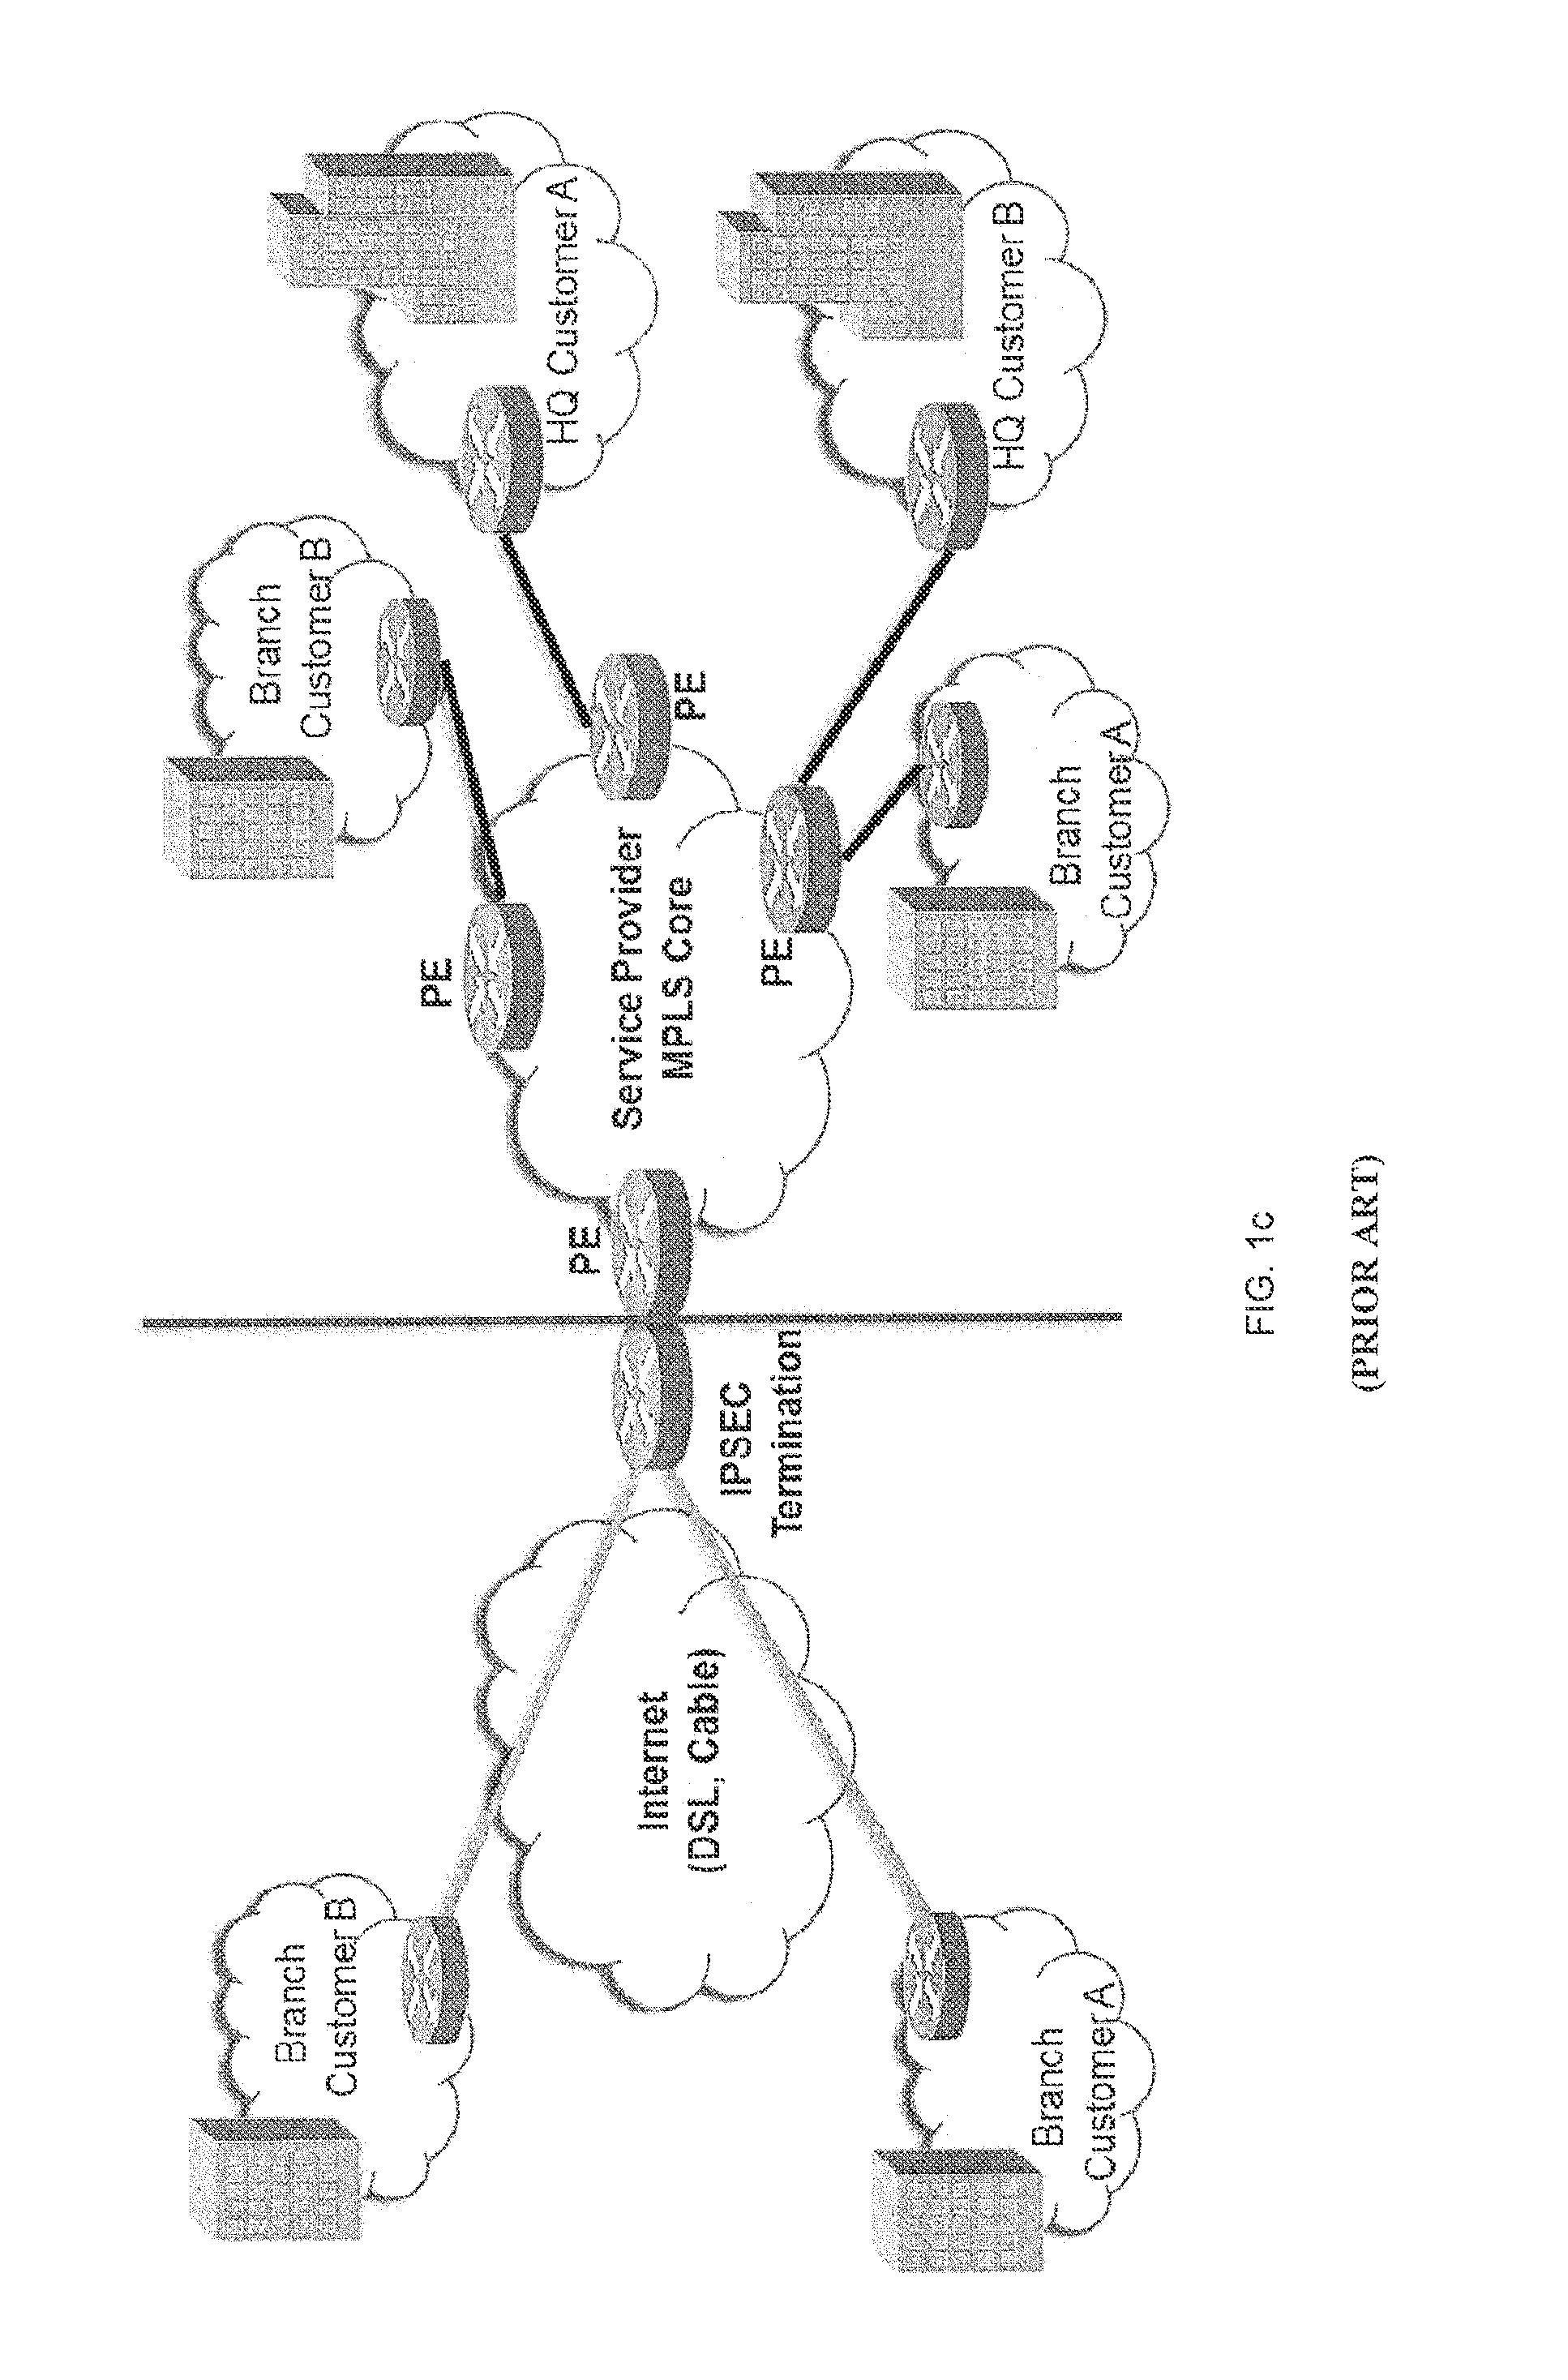 System, apparatus and method for providing a virtual network edge and overlay with virtual control plane